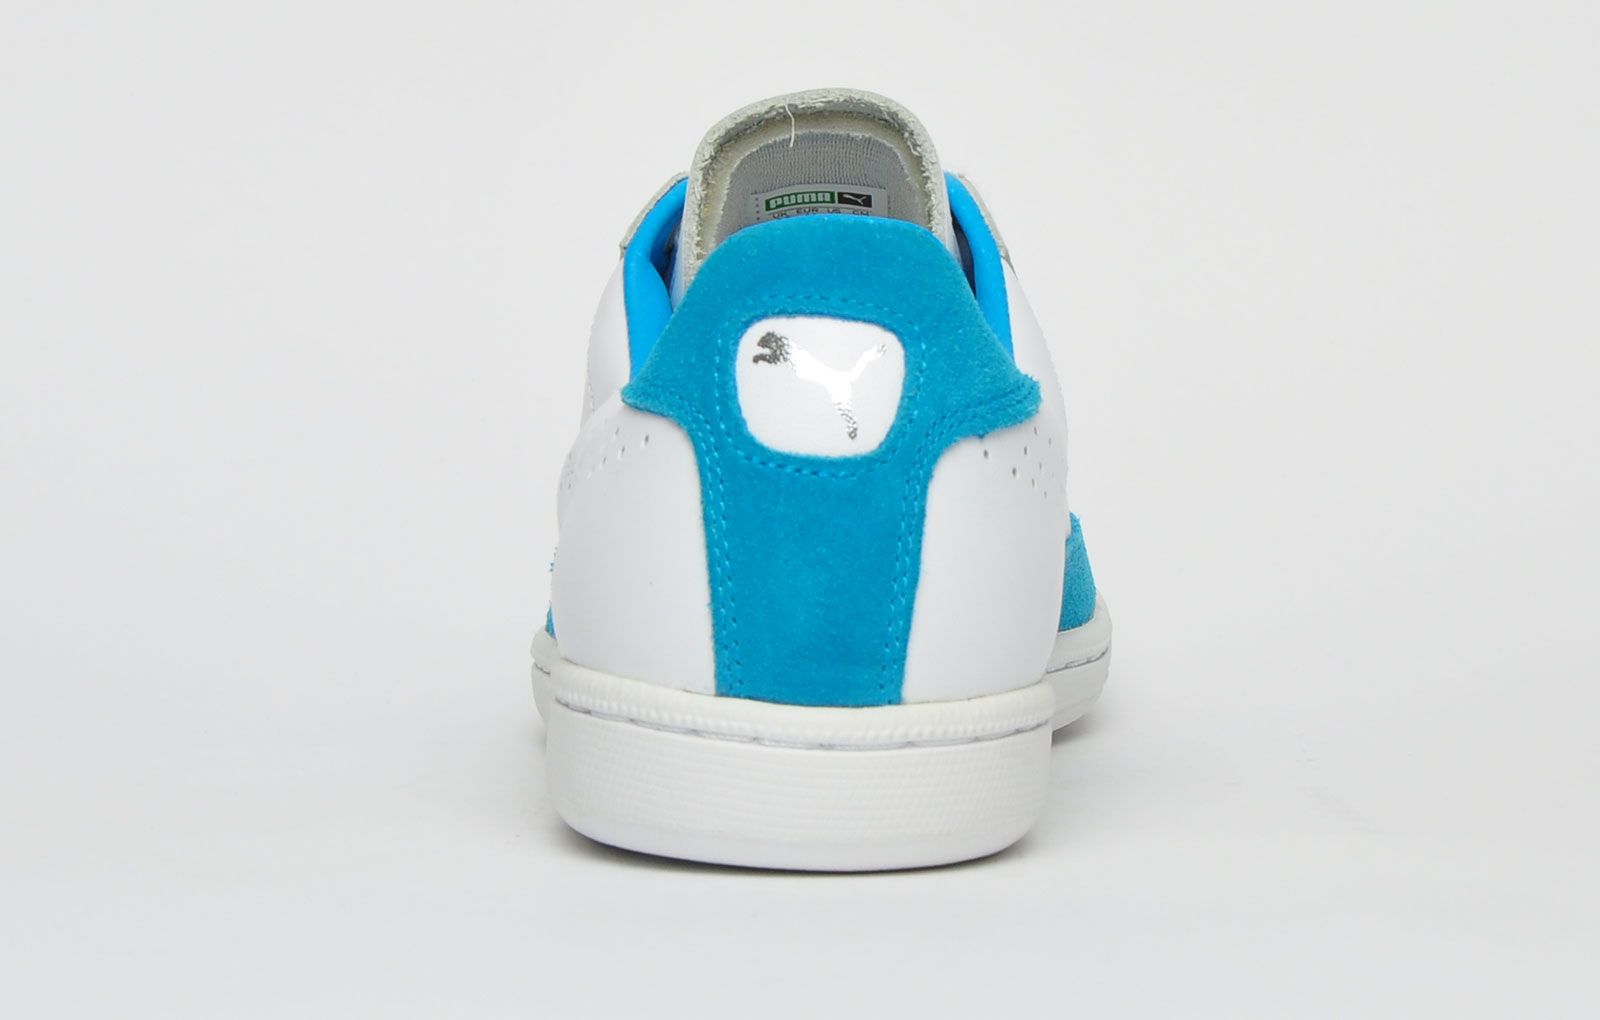 The Puma Match 74 UPC from the iconic 1974 tennis collection features a soft leather upper with side perforations for breathability with the addition of suede panelling to the sides and heel with silver Puma branding to the side to complete the look. <p>The Match 74 men’s shoe is finished off with a durable rubber sole with a textured vintage styled finish which will provide stability and grip on all surfaces and with a slimmed down look to give that sporty designer feel</p> <p class=